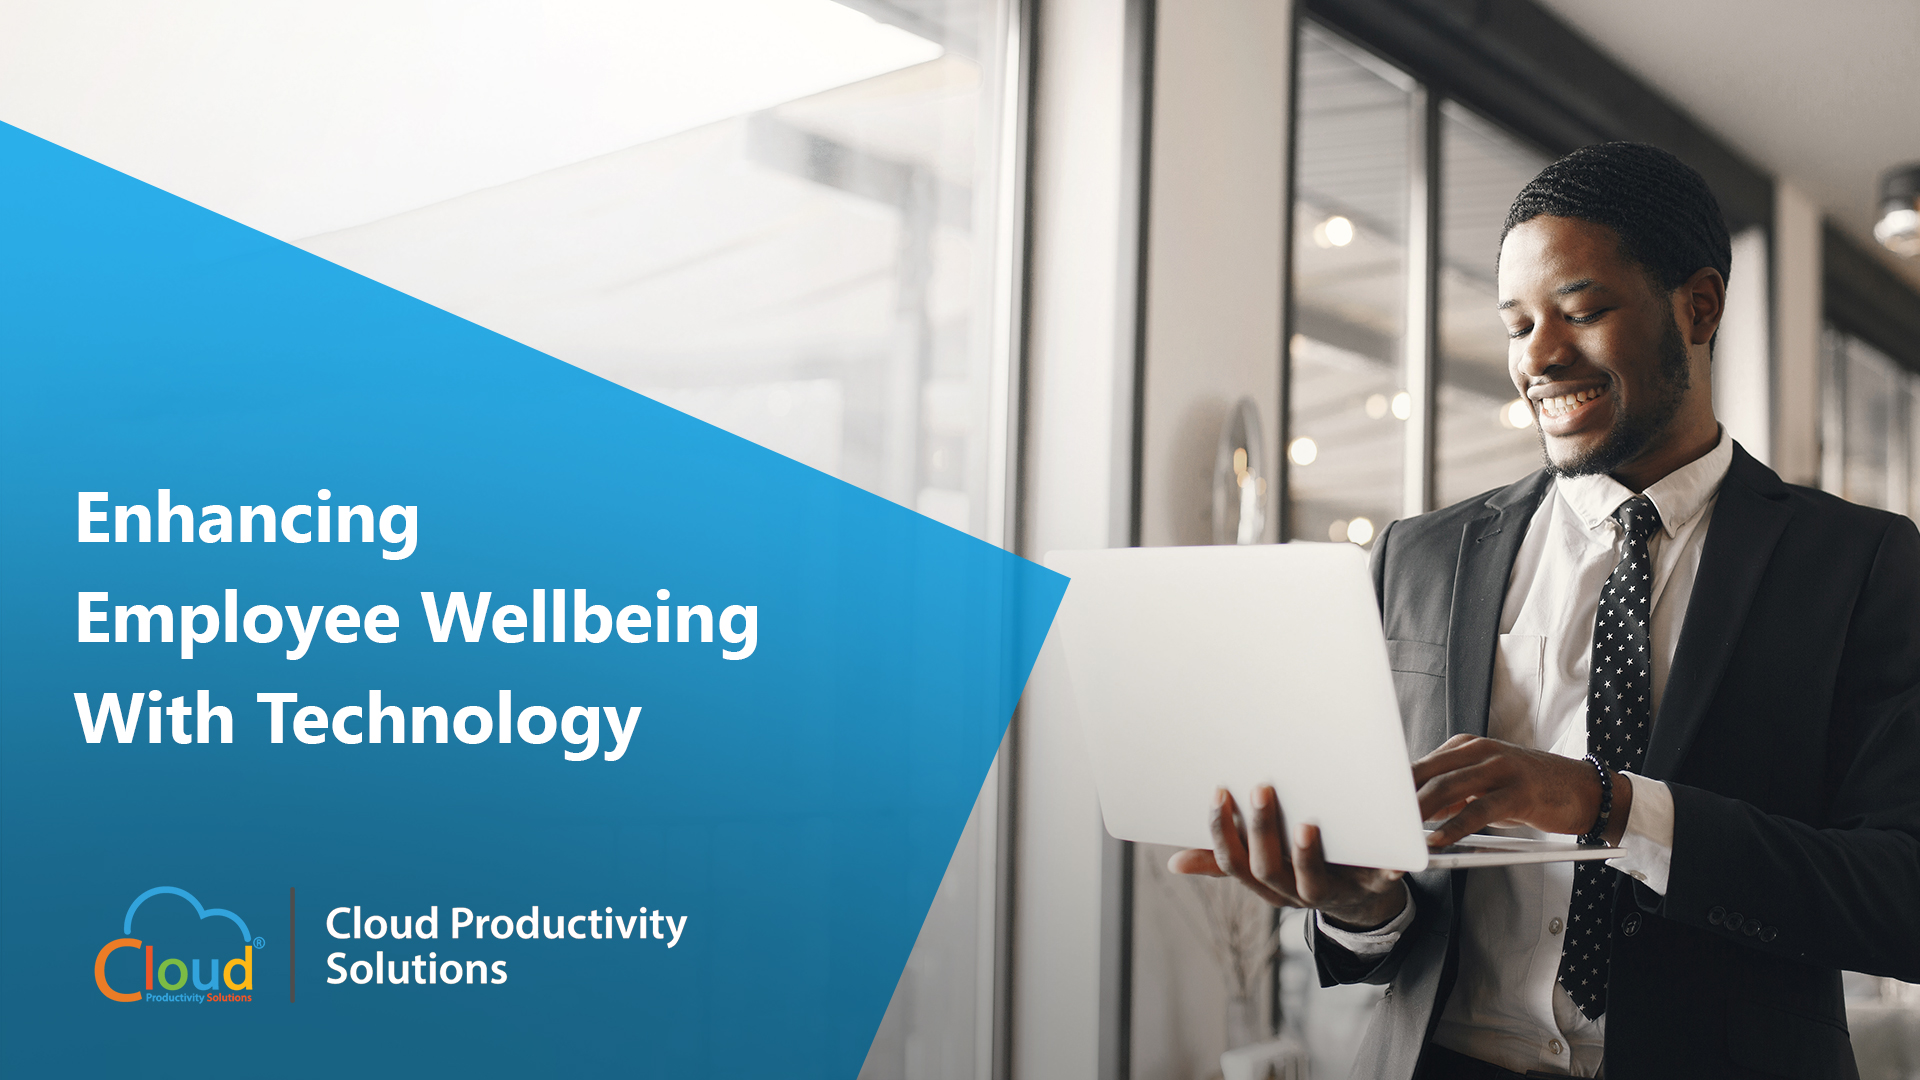 Enhancing employee wellbeing with technology